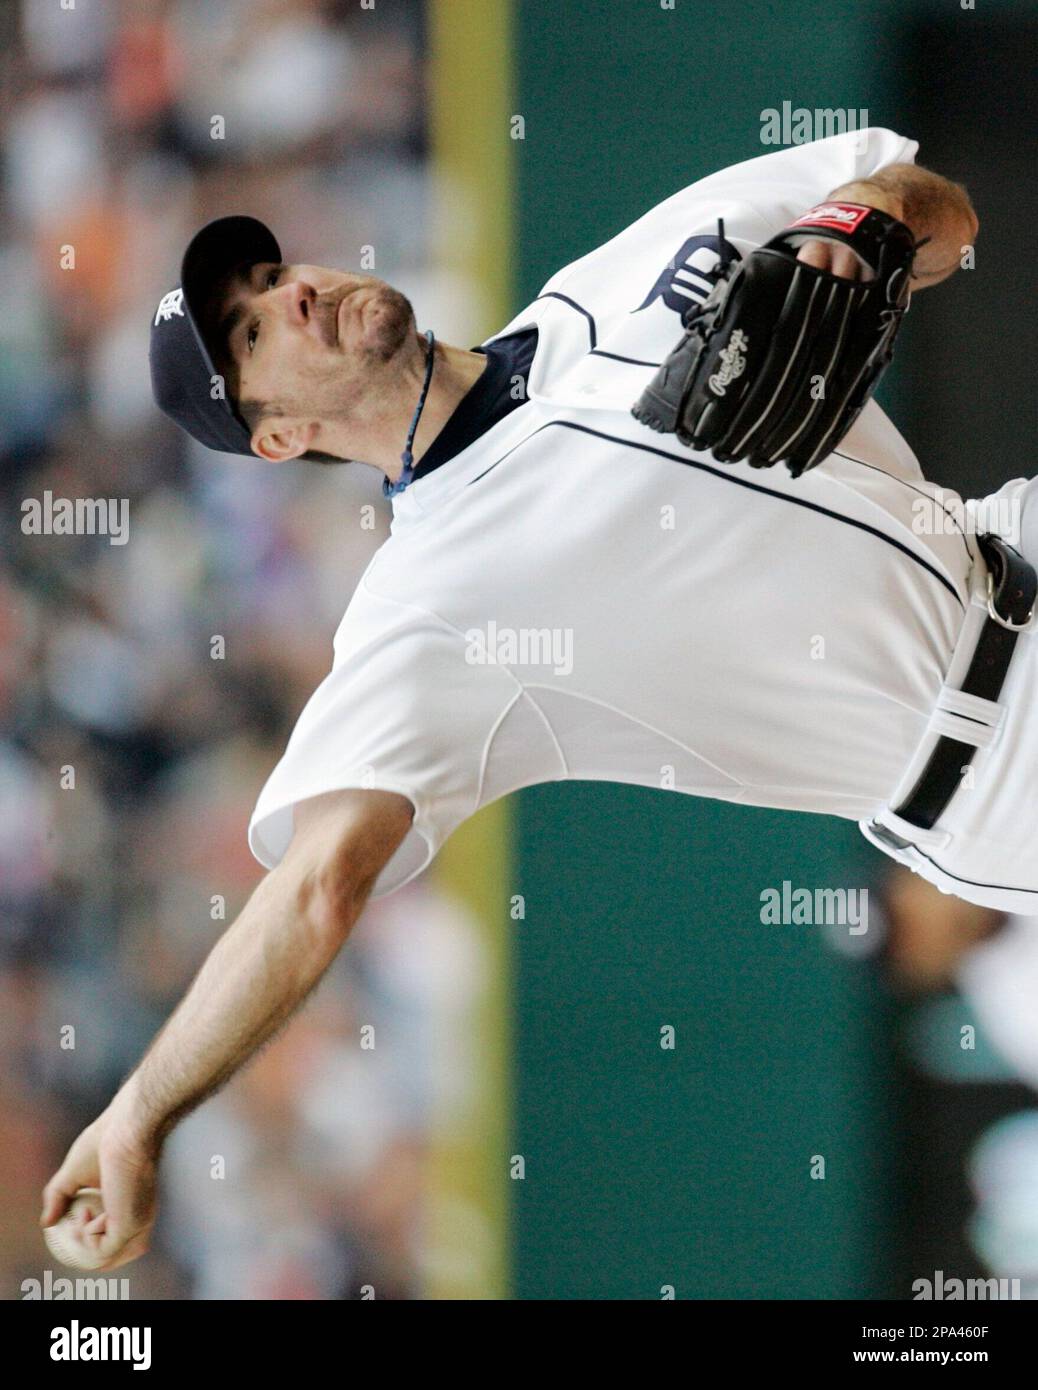 Detroit Tigers starter Justin Verlander pitches against the St. Louis  Cardinals in the fourth inning of a baseball game Friday, June 23, 2006, in  Detroit. (AP Photo/Duane Burleson Stock Photo - Alamy